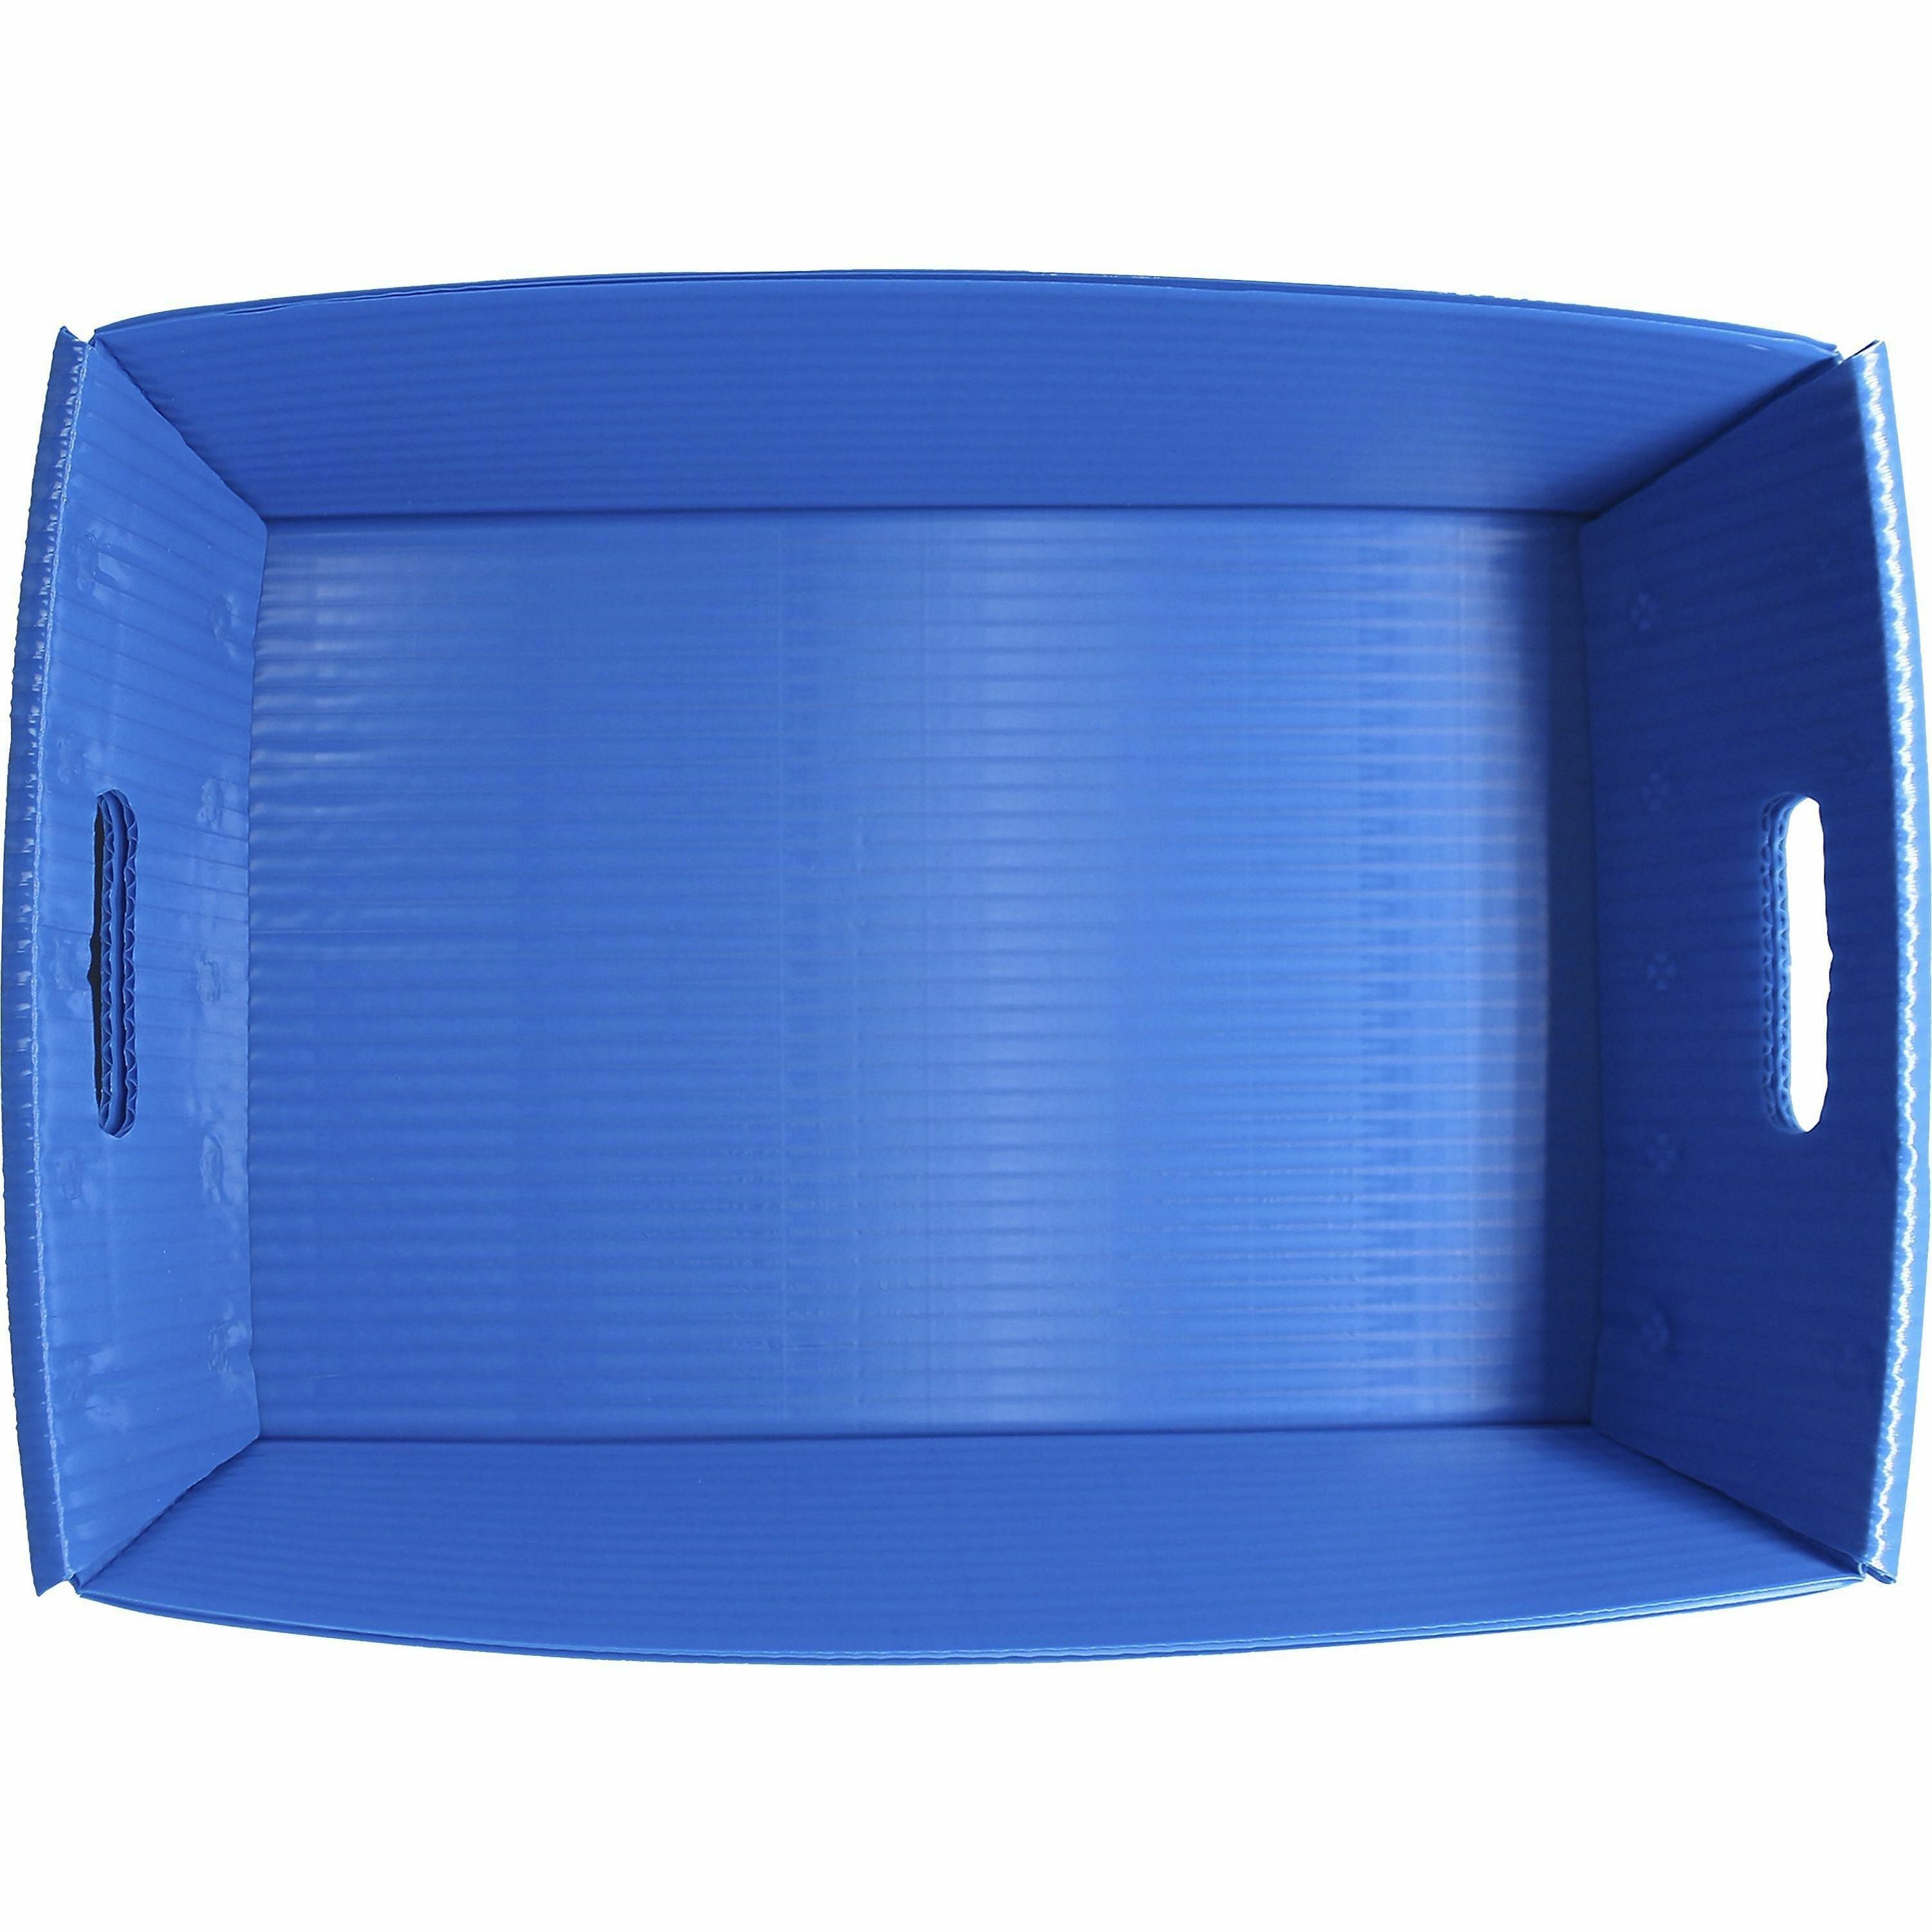 flipside-plastic-welded-letter-trays-45-height-x-18-width-x-12-depth-welded-handle-compact-stackable-storage-space-durable-blue-plastic-2-pack_flp40361 - 2